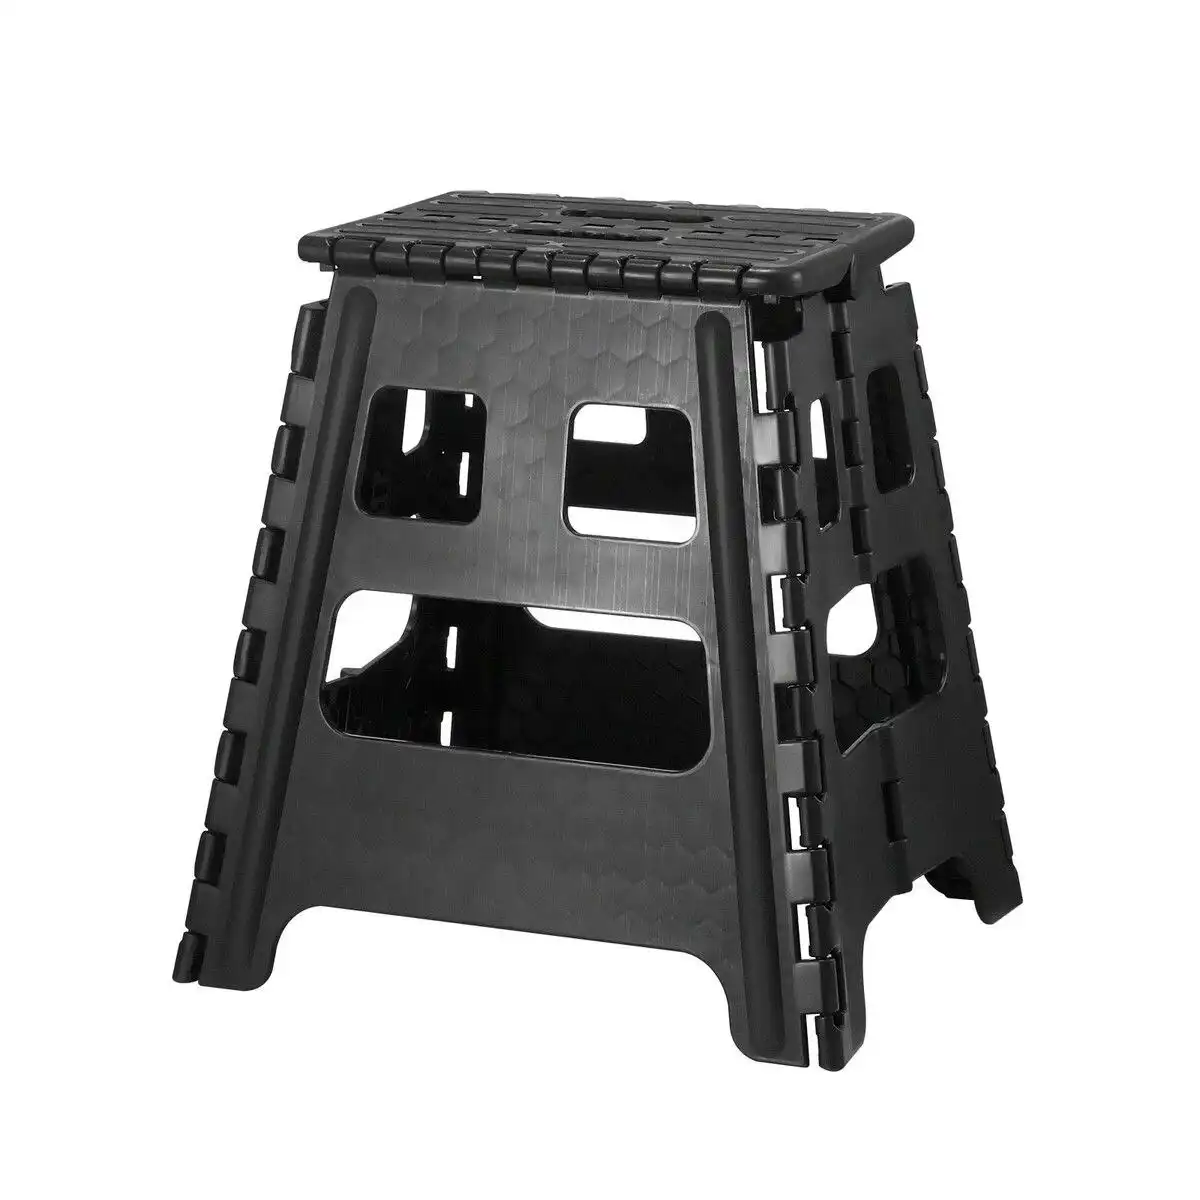 Ausway Black Foldable Step Stool with Handle Footstool Plastic Childrens Chair Portable Helper Kitchen Potty Bathroom 29x22x39cm